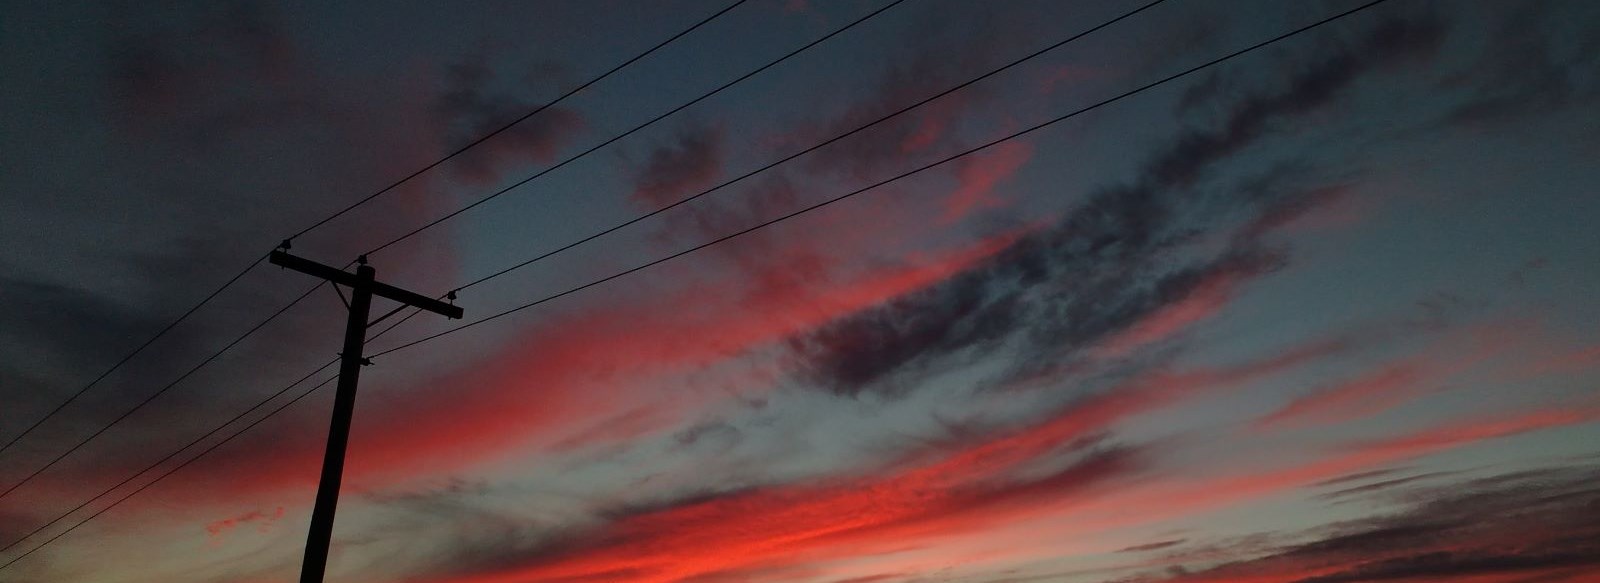 Hydro wires and sunset